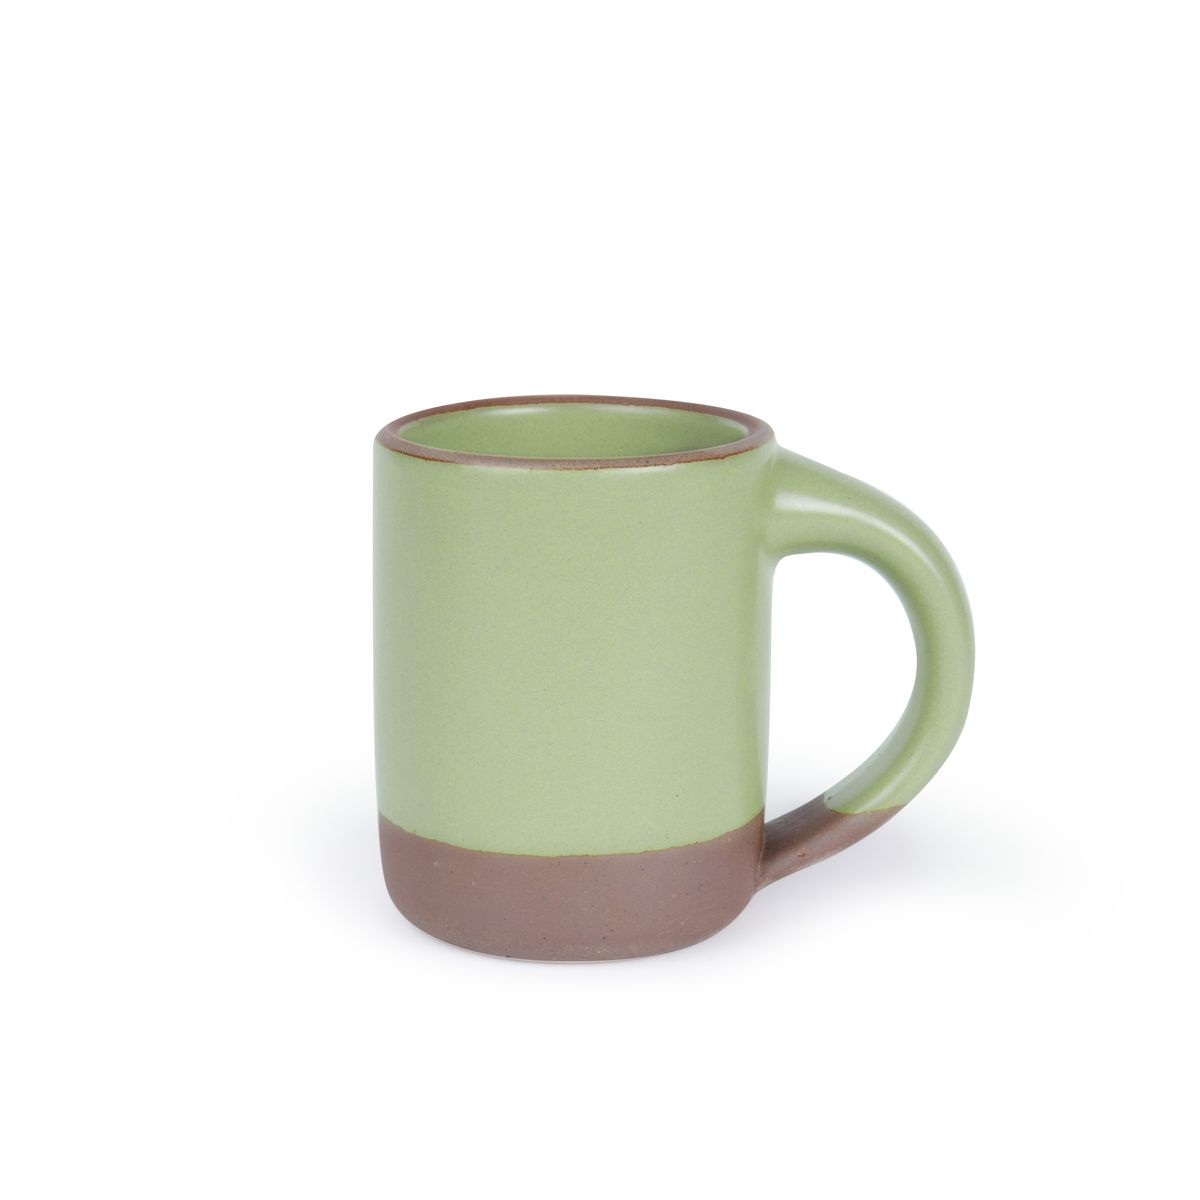 A medium sized ceramic mug with handle in a calming sage green color featuring iron speckles and unglazed rim and bottom base.